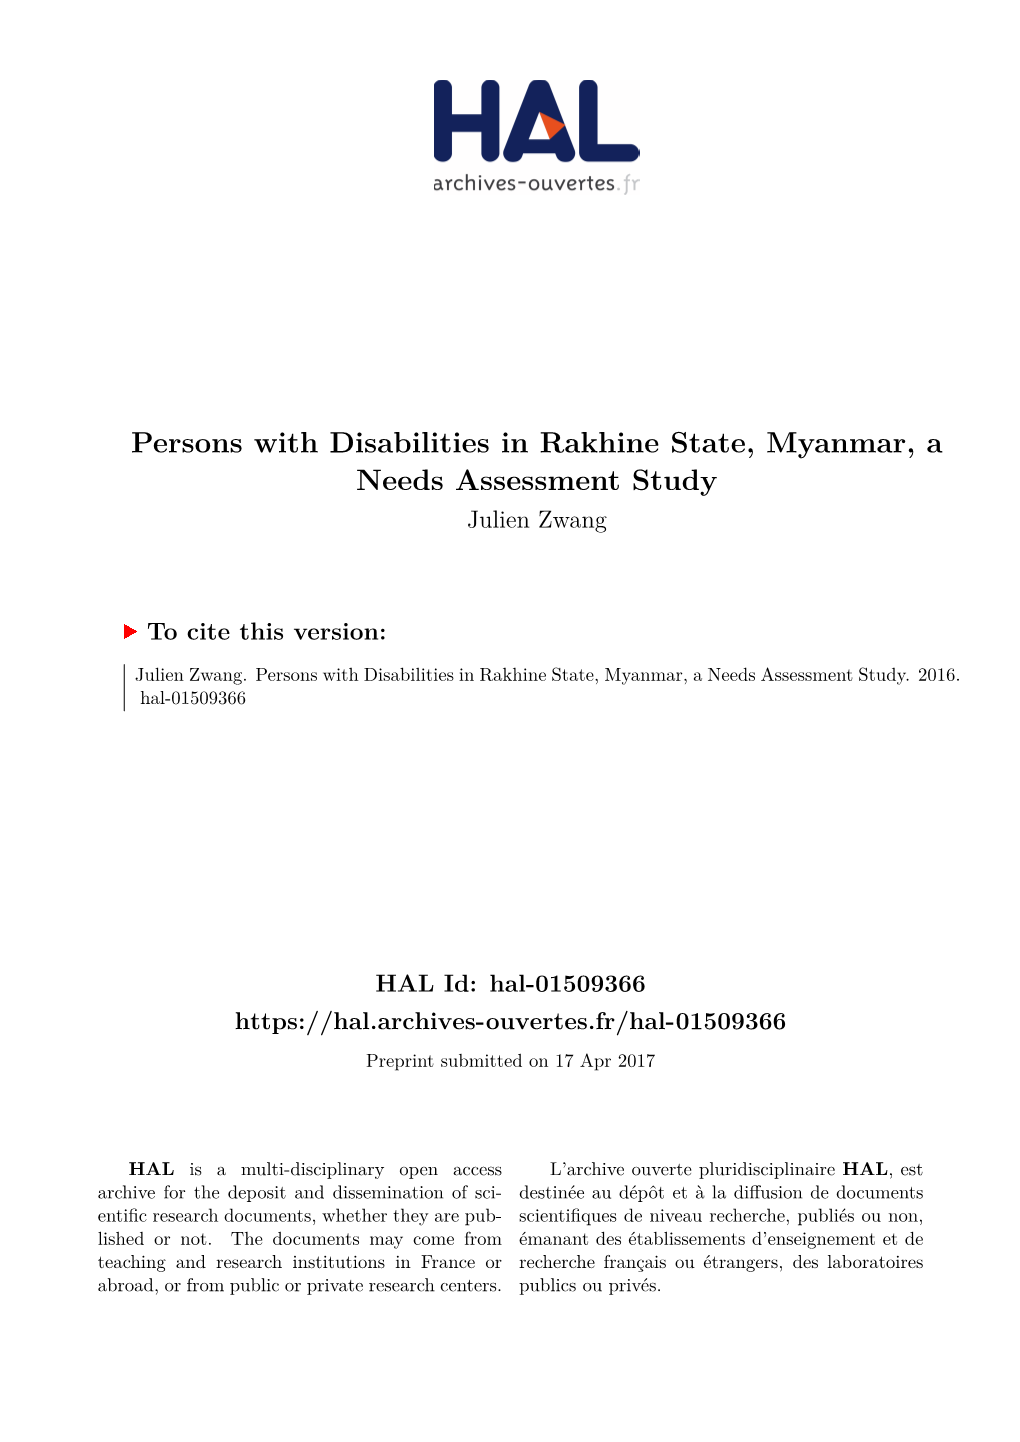 Persons with Disabilities in Rakhine State, Myanmar, a Needs Assessment Study Julien Zwang